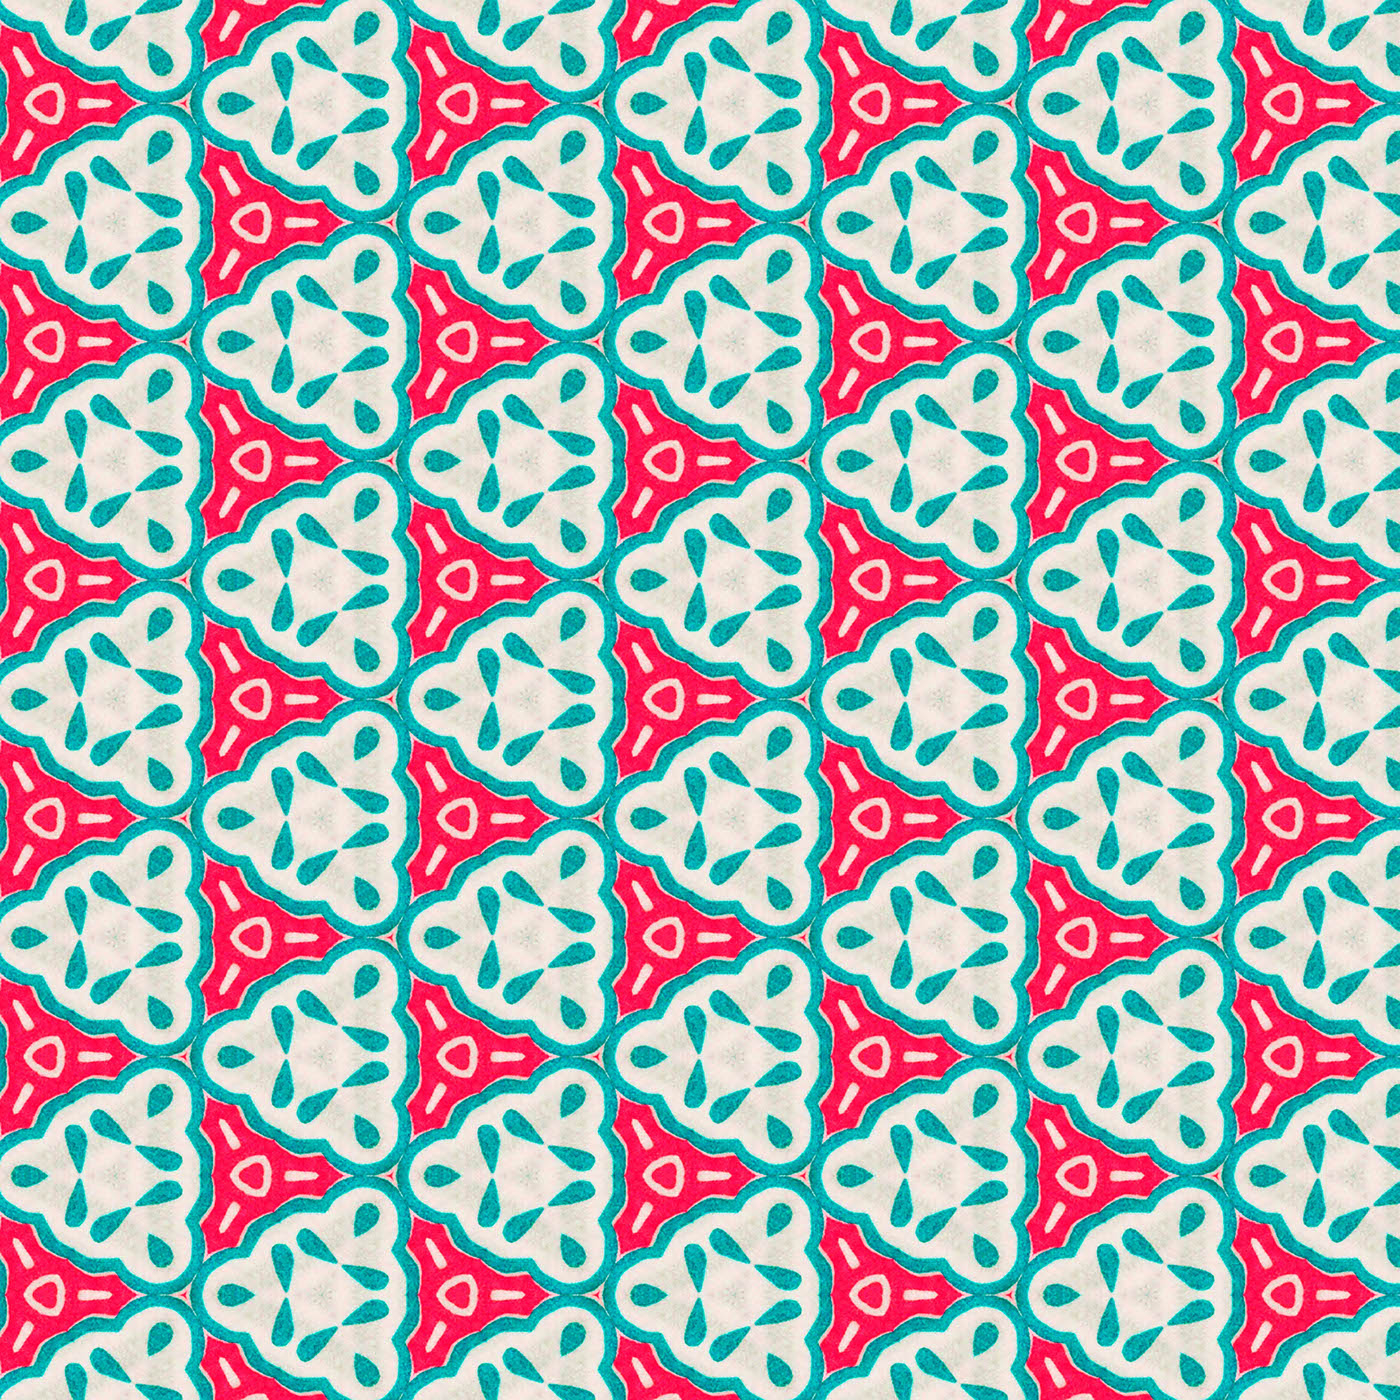 Origami Paper Pattern Surface Pattern Origami Paper On Behance